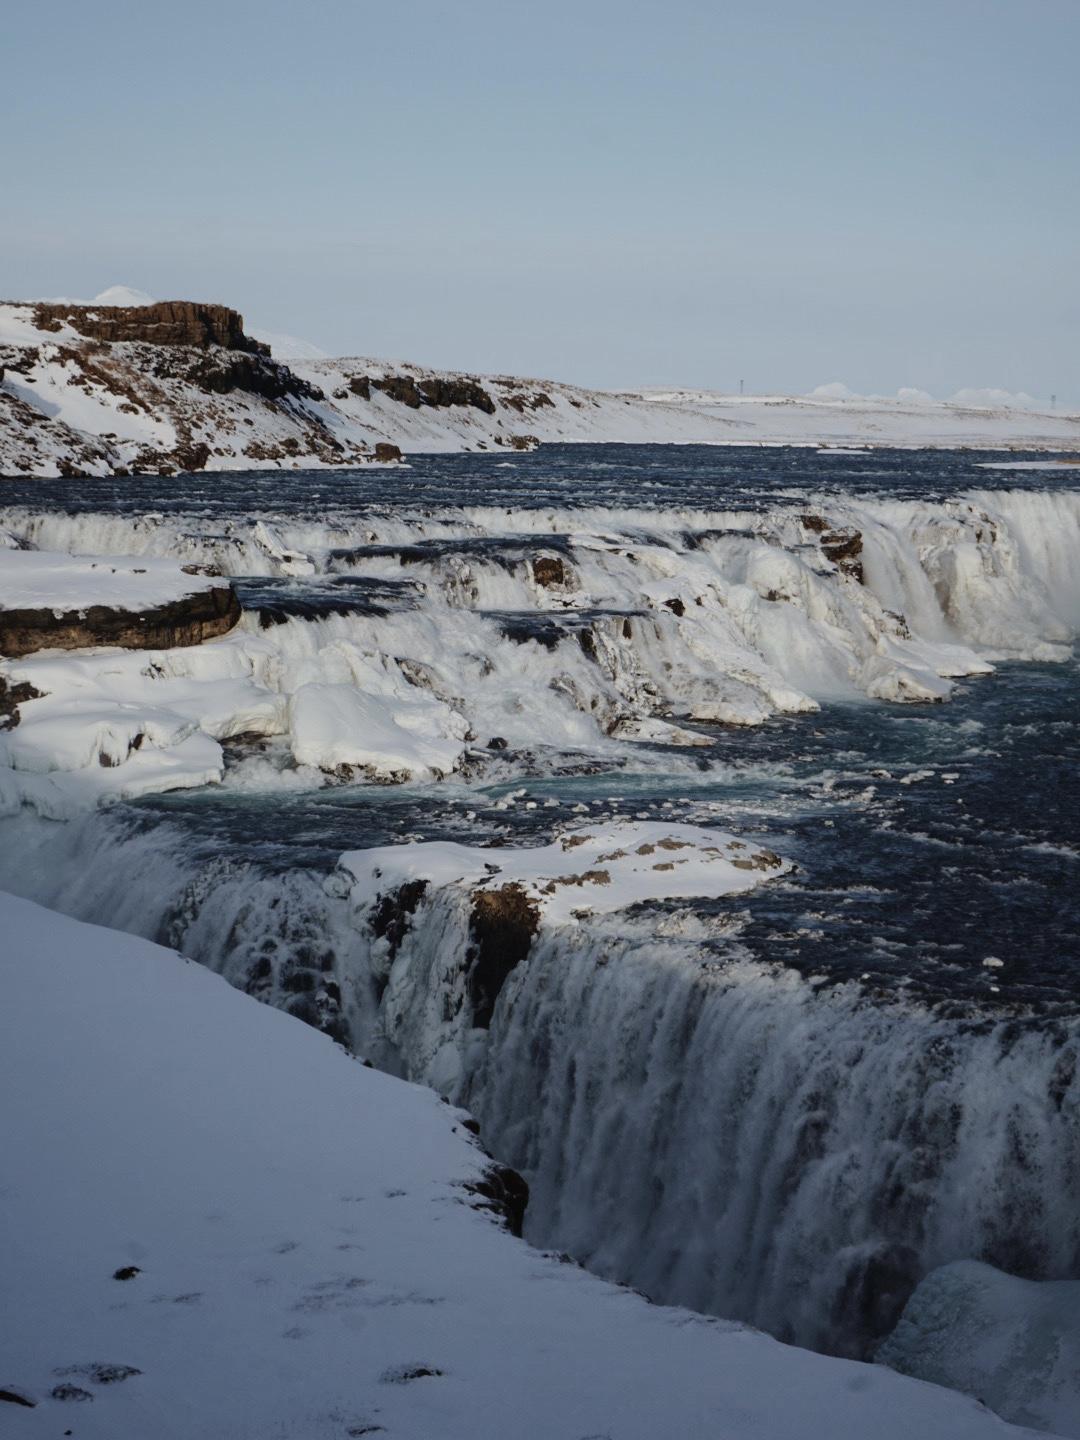 Gullfoss Waterfall in Iceland in winter with snow and ice surrounding the falls.